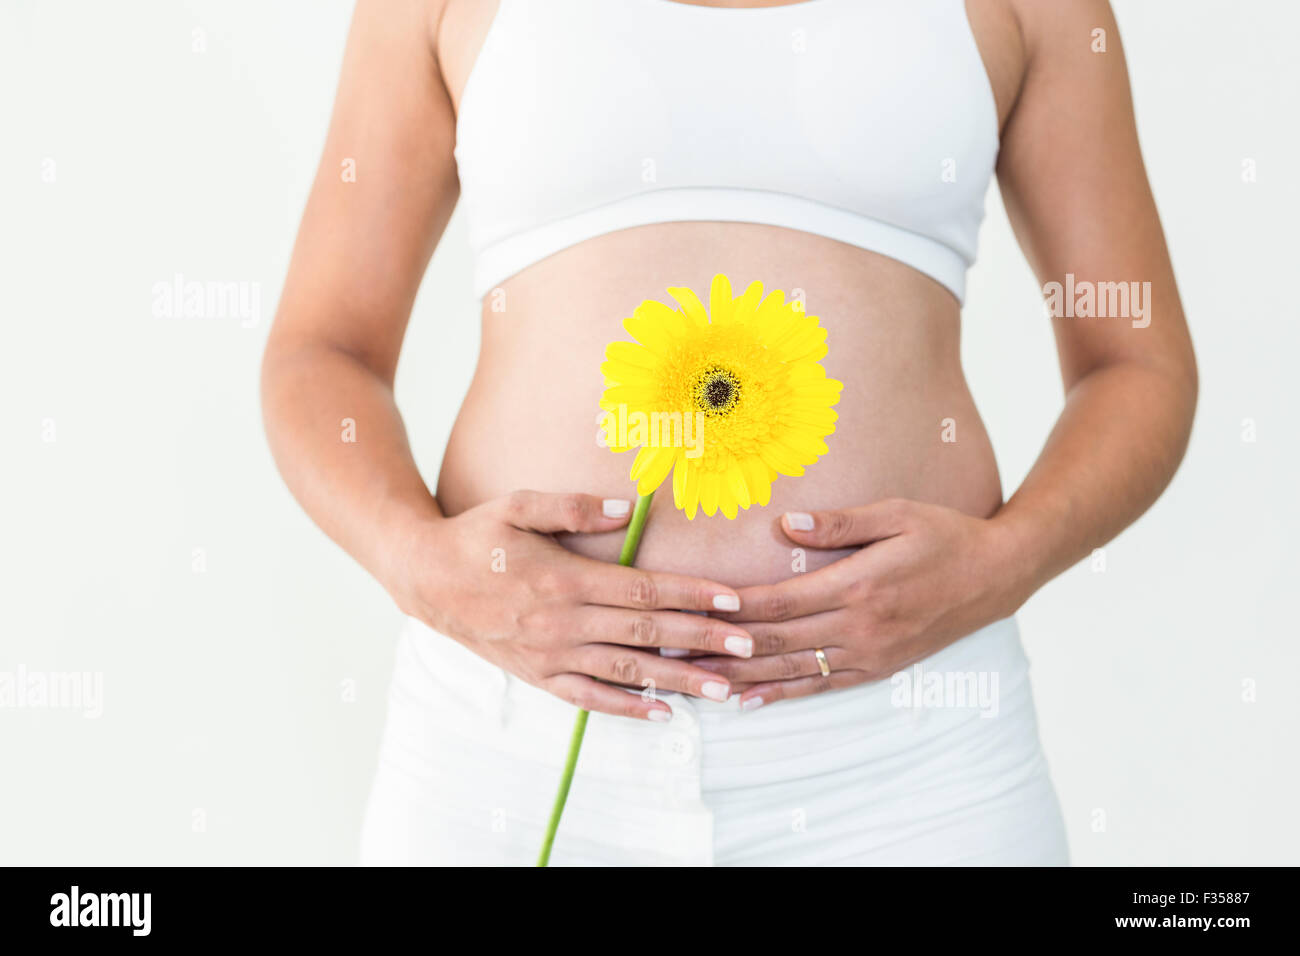 Pregnant woman touching her stomach while holding yellow flower Stock Photo